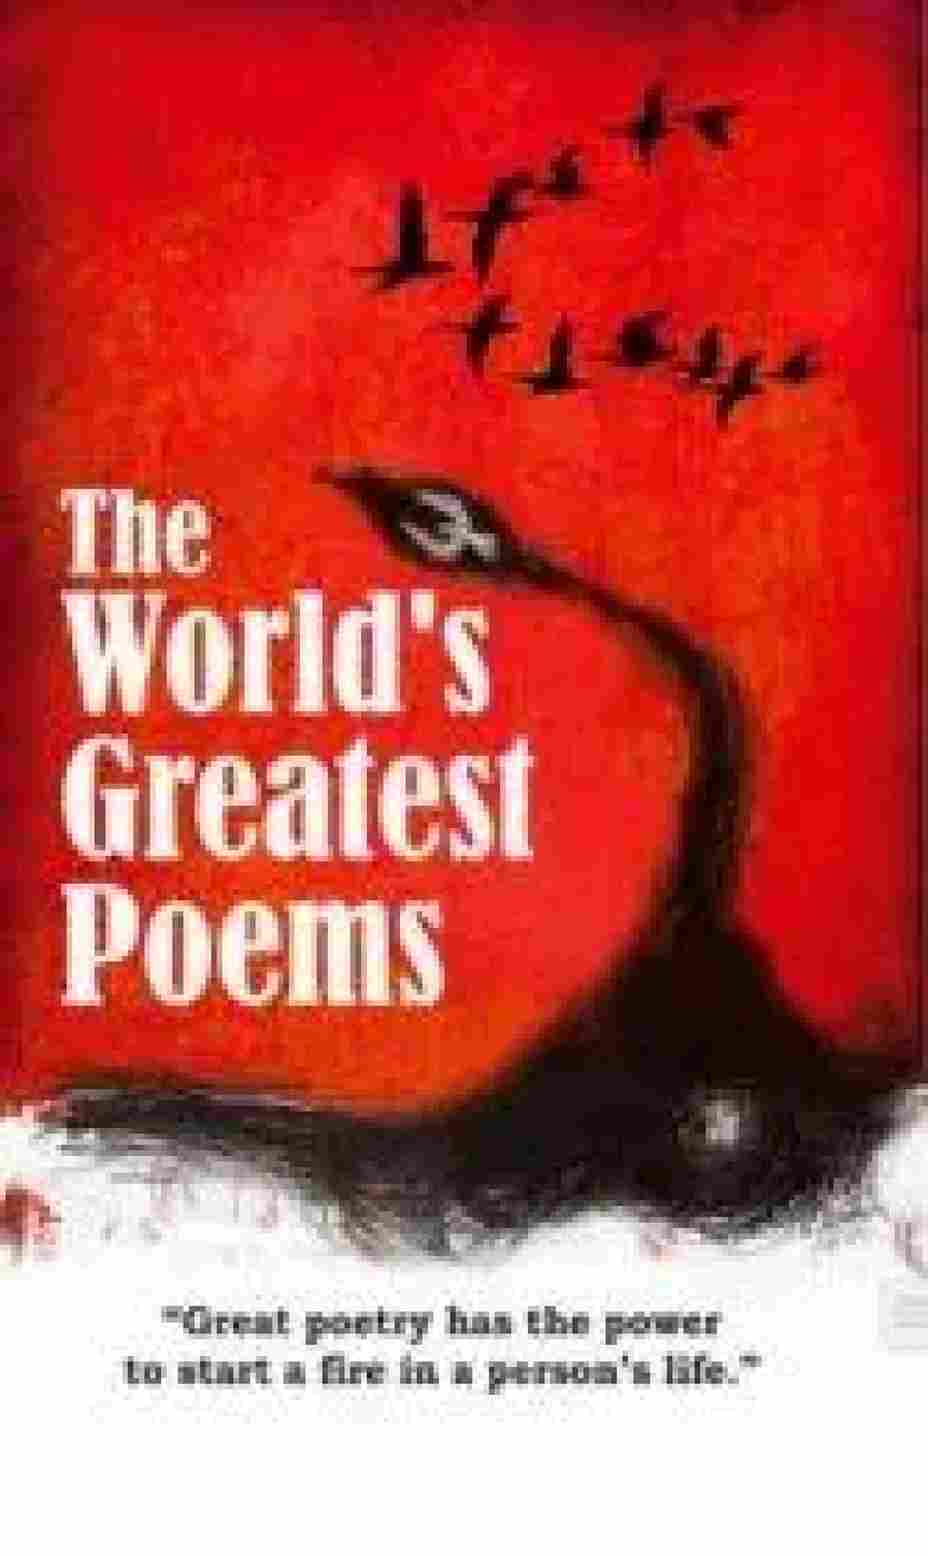 The world's greatest poems -